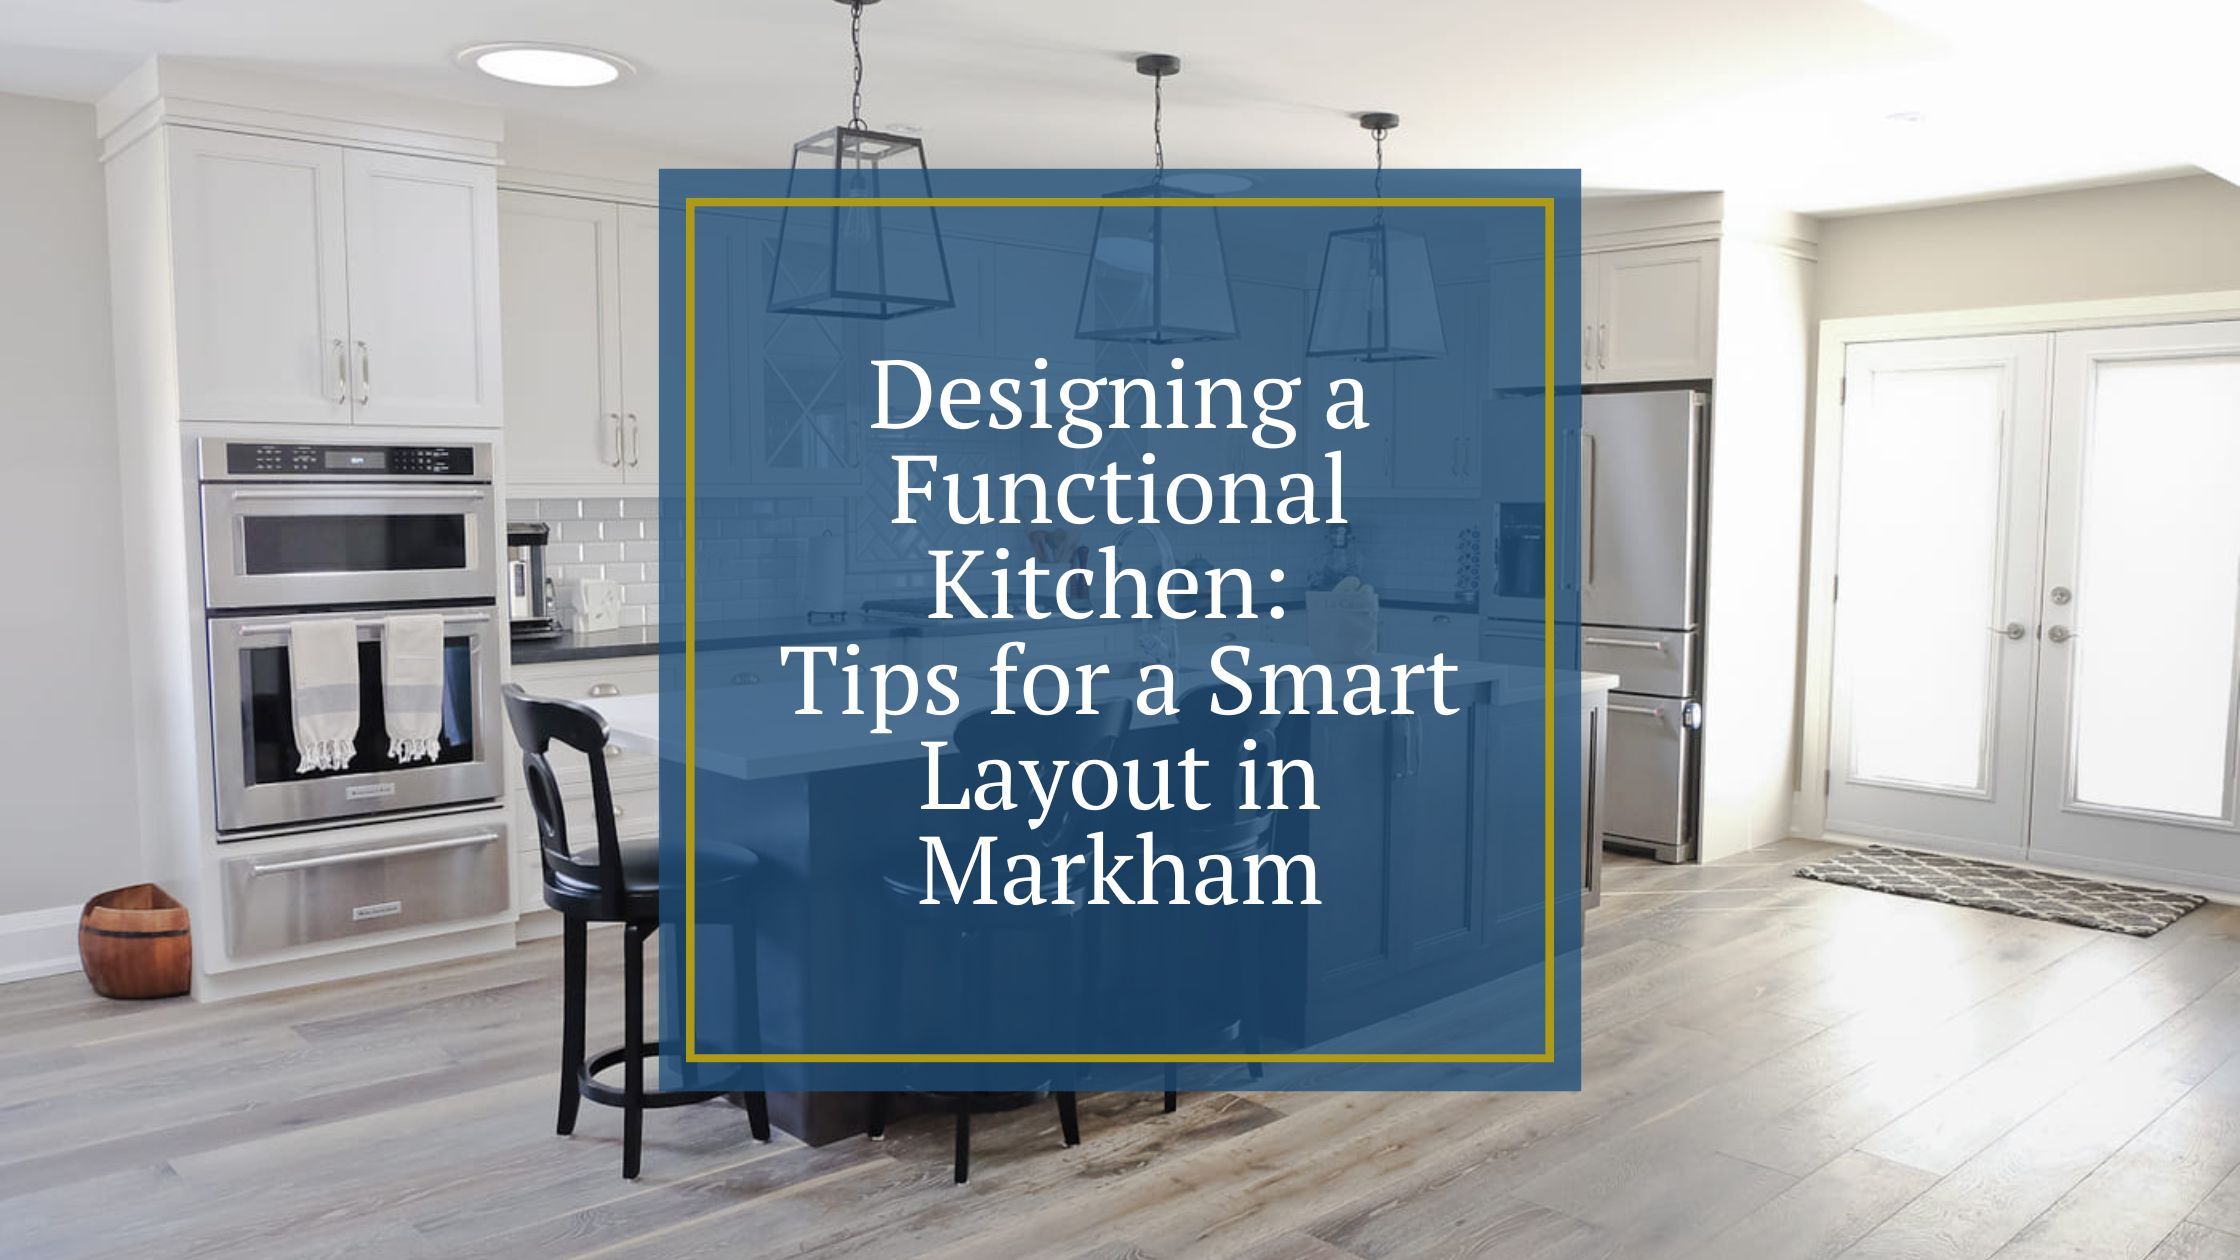 Designing a Functional Kitchen: Tips for a Smart Layout in Markham